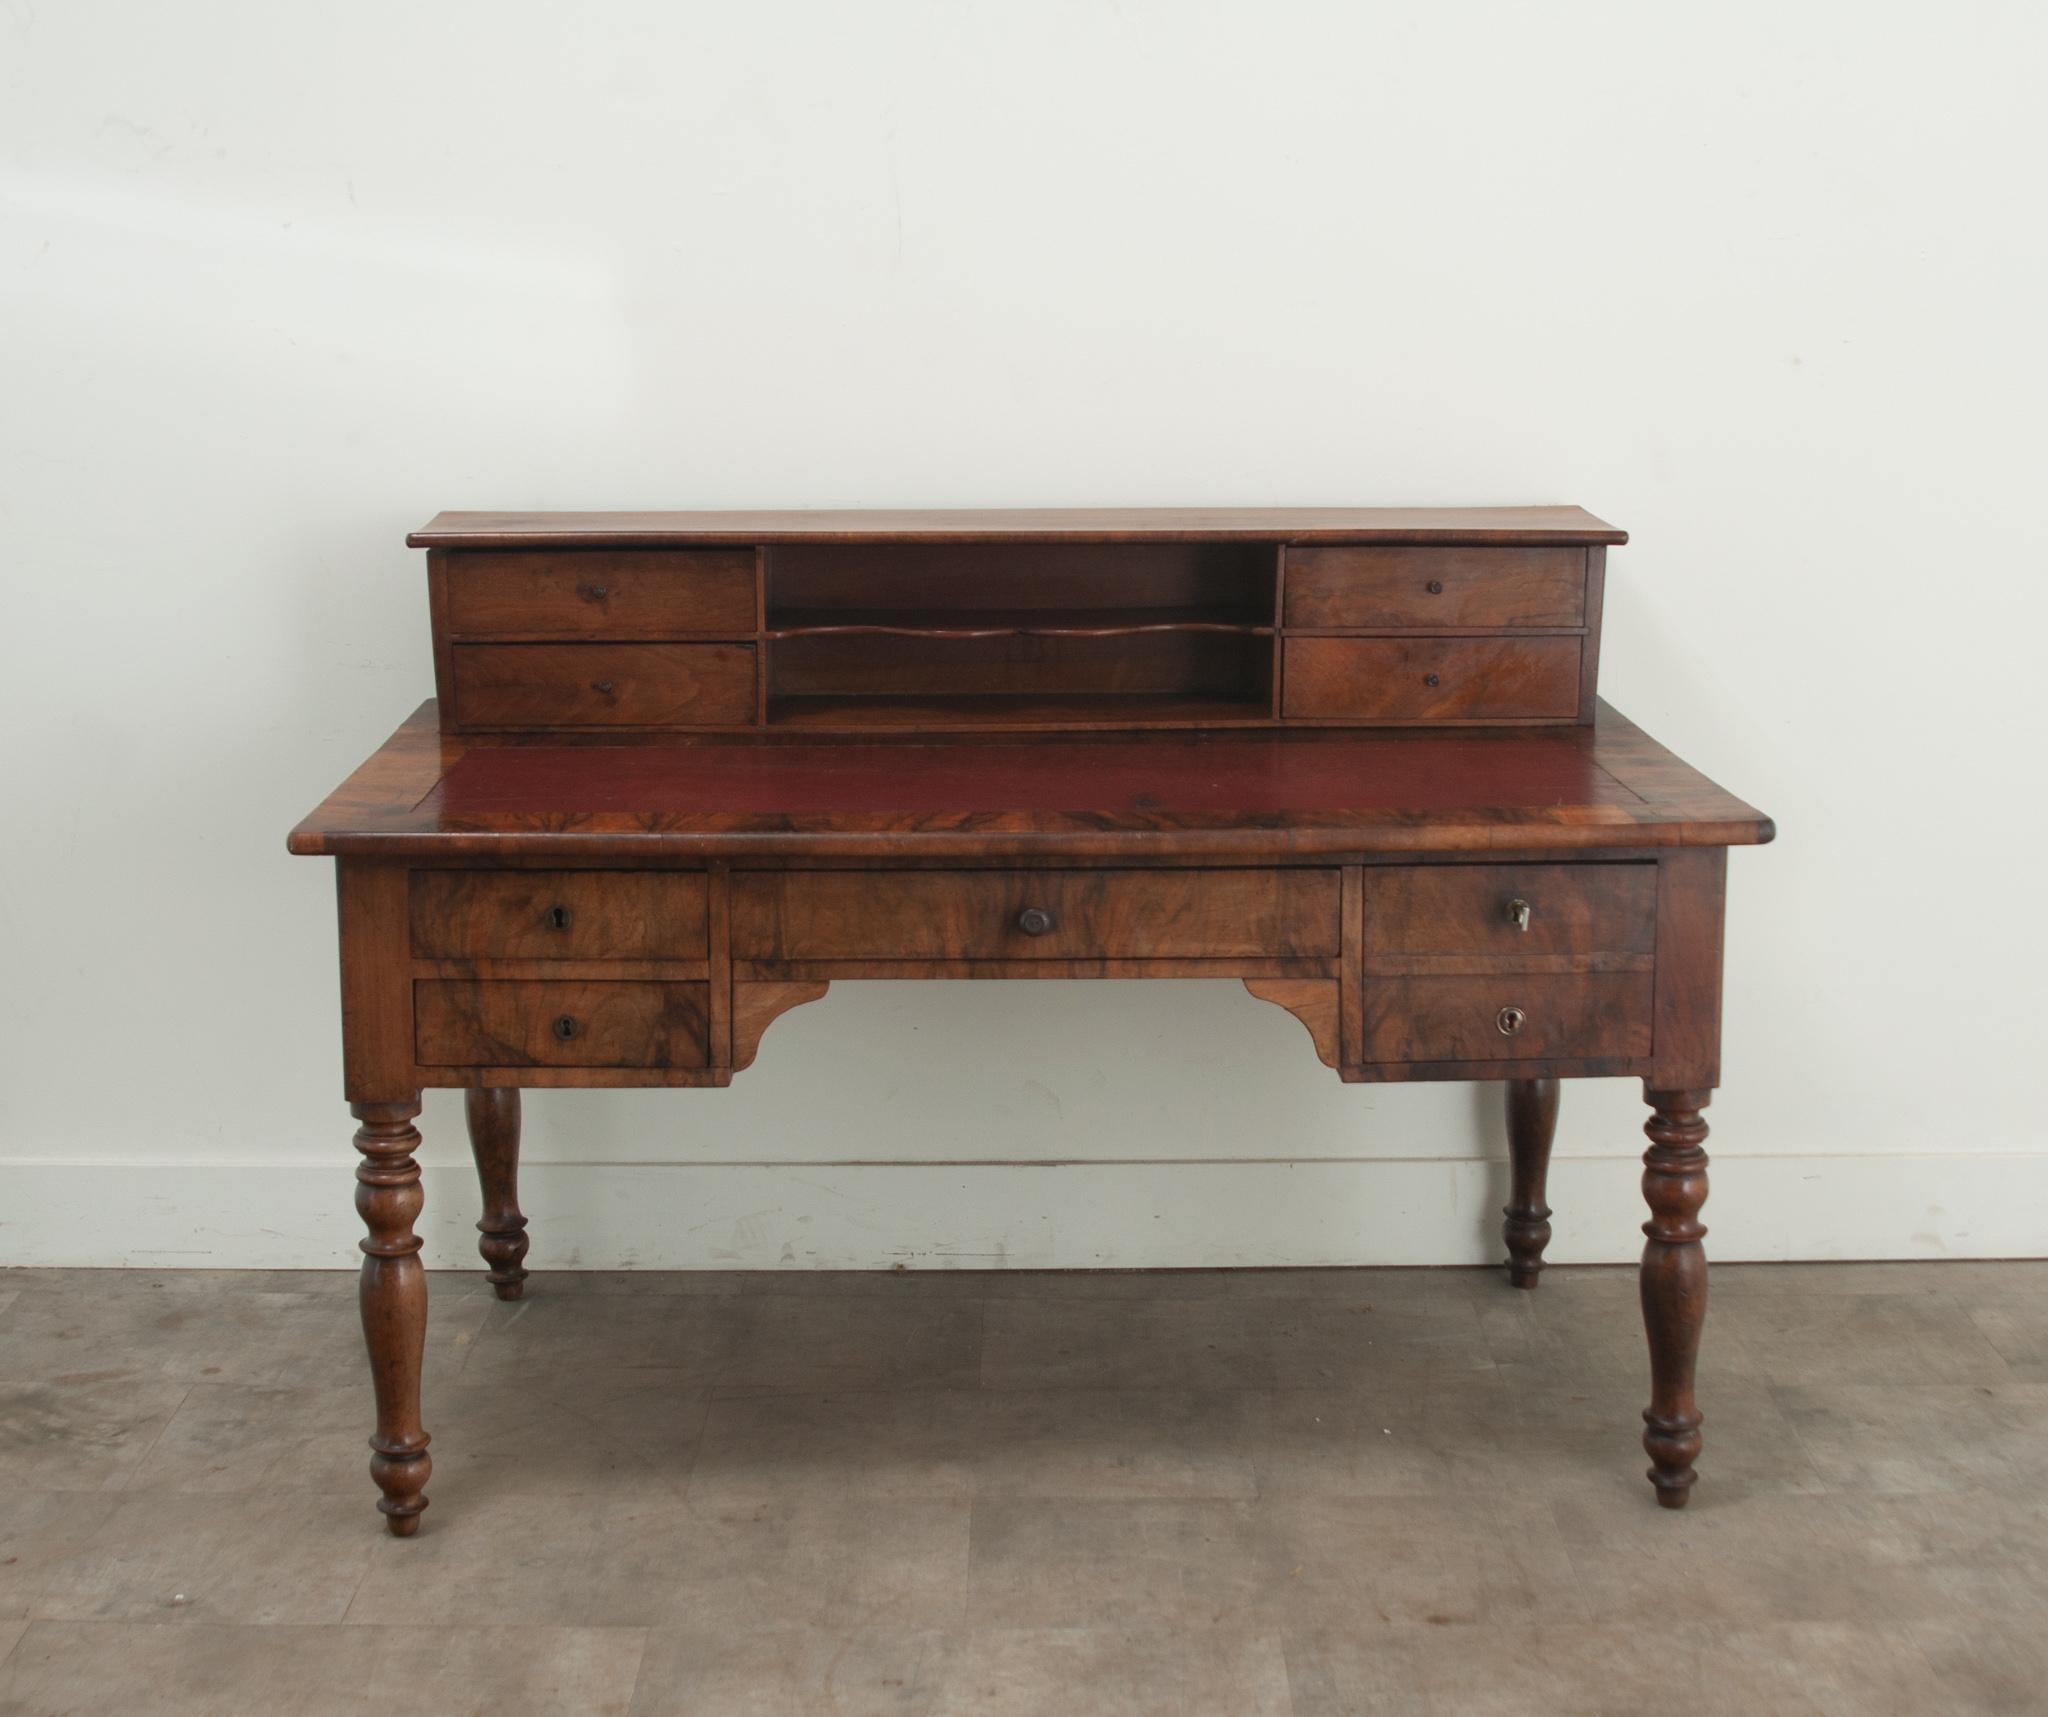 A French writing desk made of rosewood and mahogany. This desk has an upper console containing four drawers and a center open cavity with a scalloped shelf. The writing surface has an inset leather top and has a pull out slide on its right side for